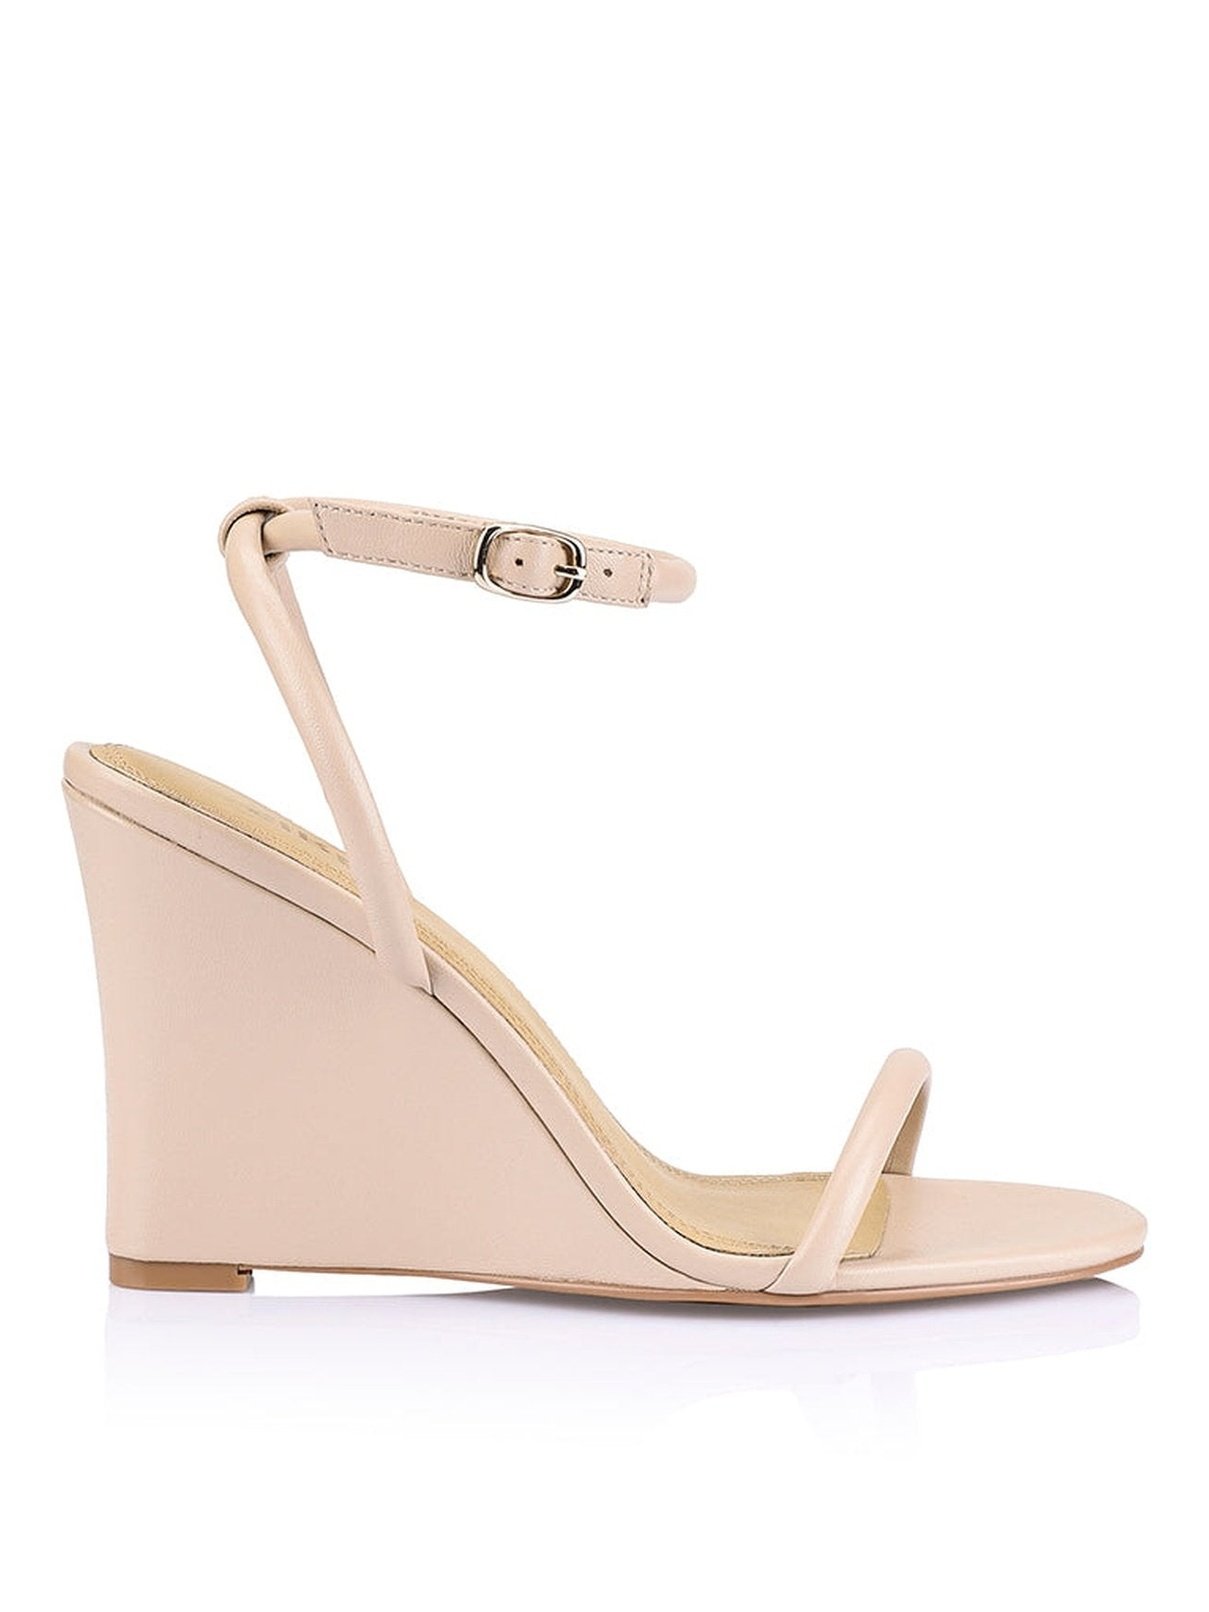 Bebe Wedge Sandals - Nude Leather